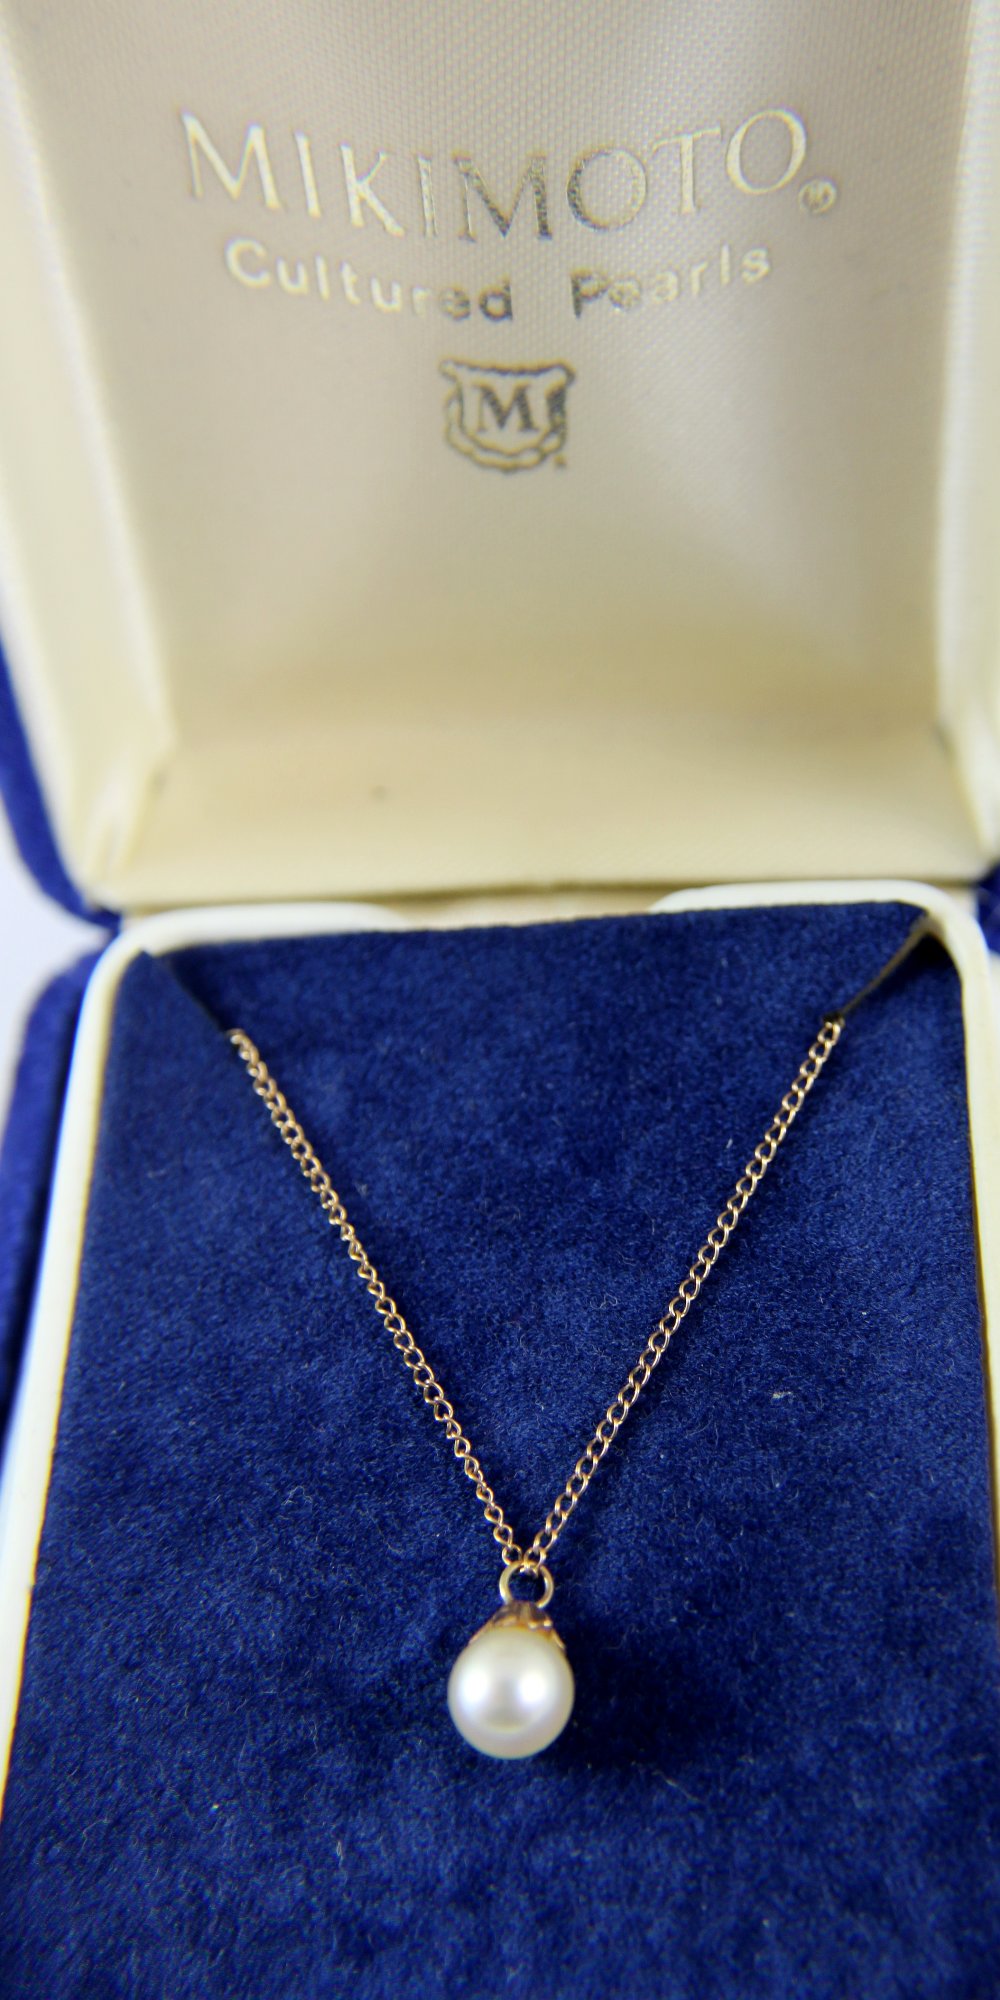 Mikimoto cultivated pearl pendant on 9 ct yellow gold necklace